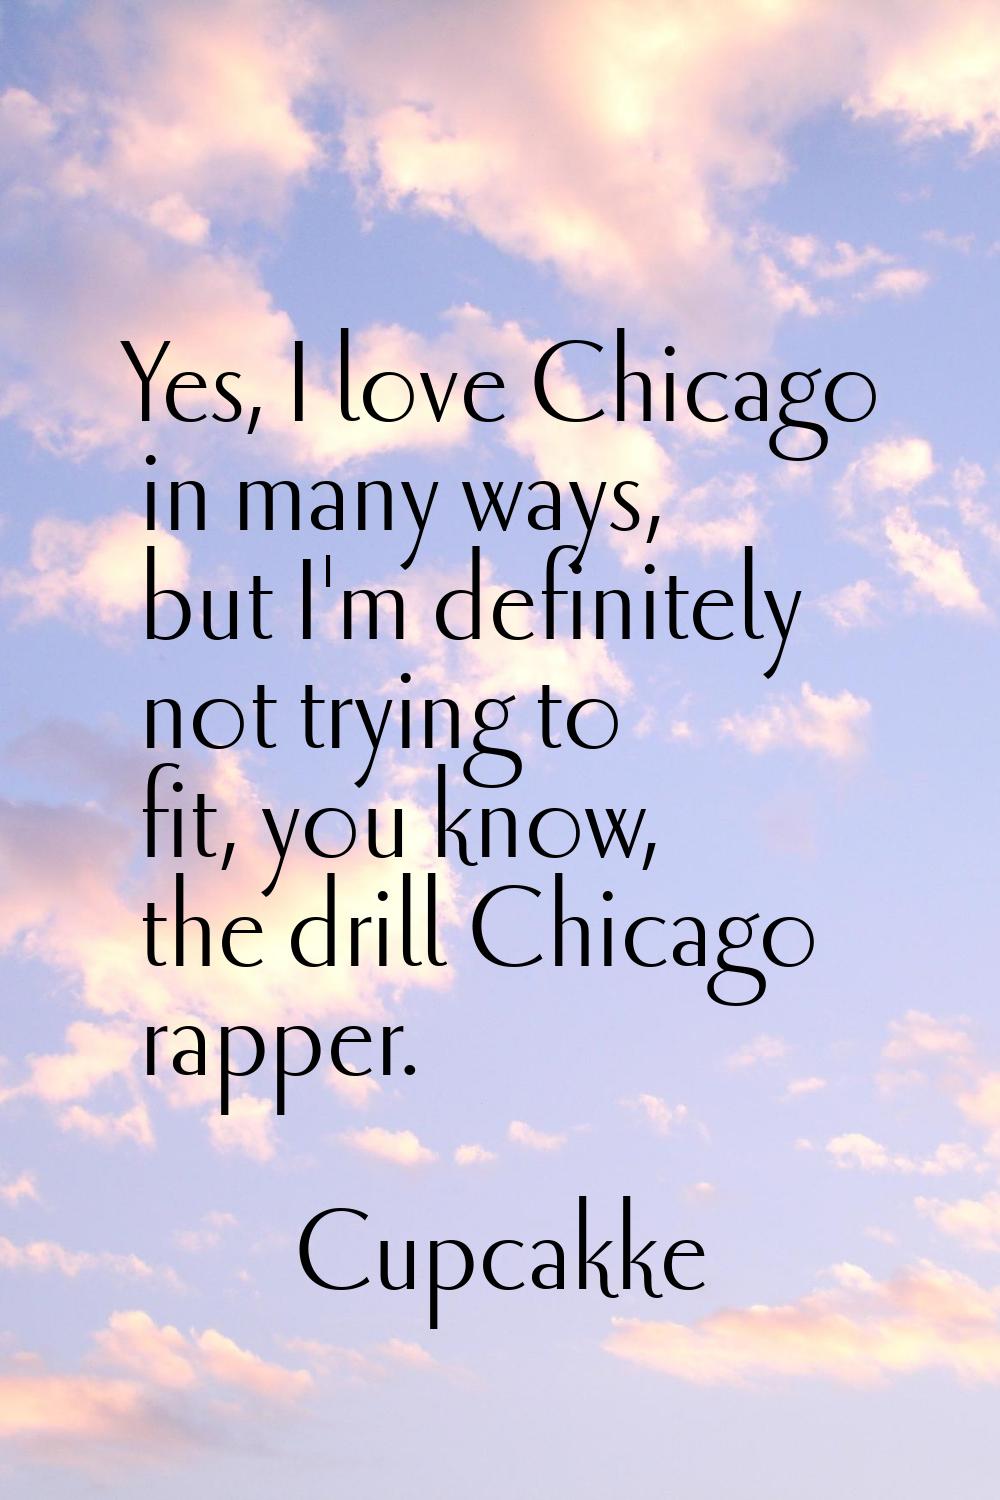 Yes, I love Chicago in many ways, but I'm definitely not trying to fit, you know, the drill Chicago